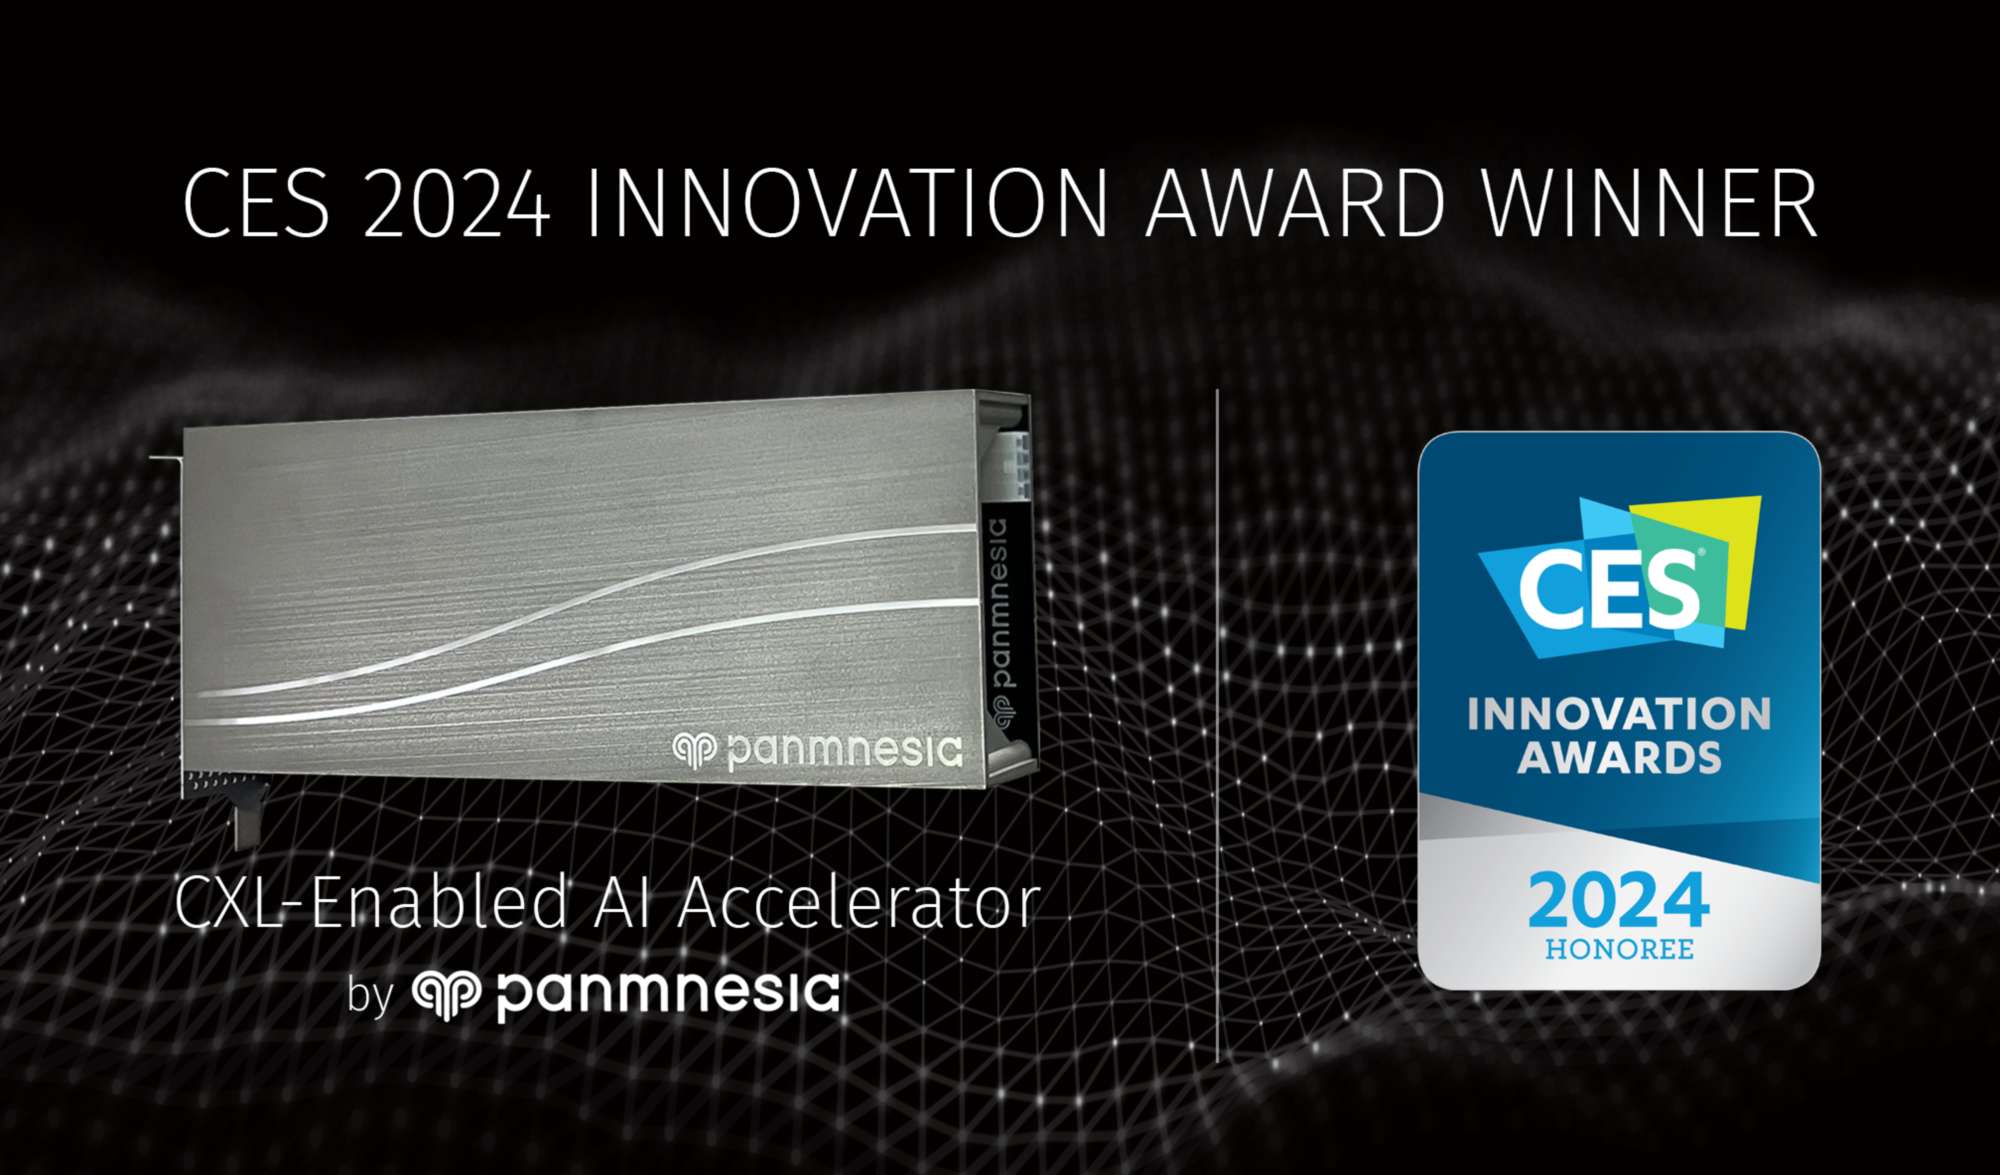 Obscure startup wins prestigious CES 2024 award — youve probably